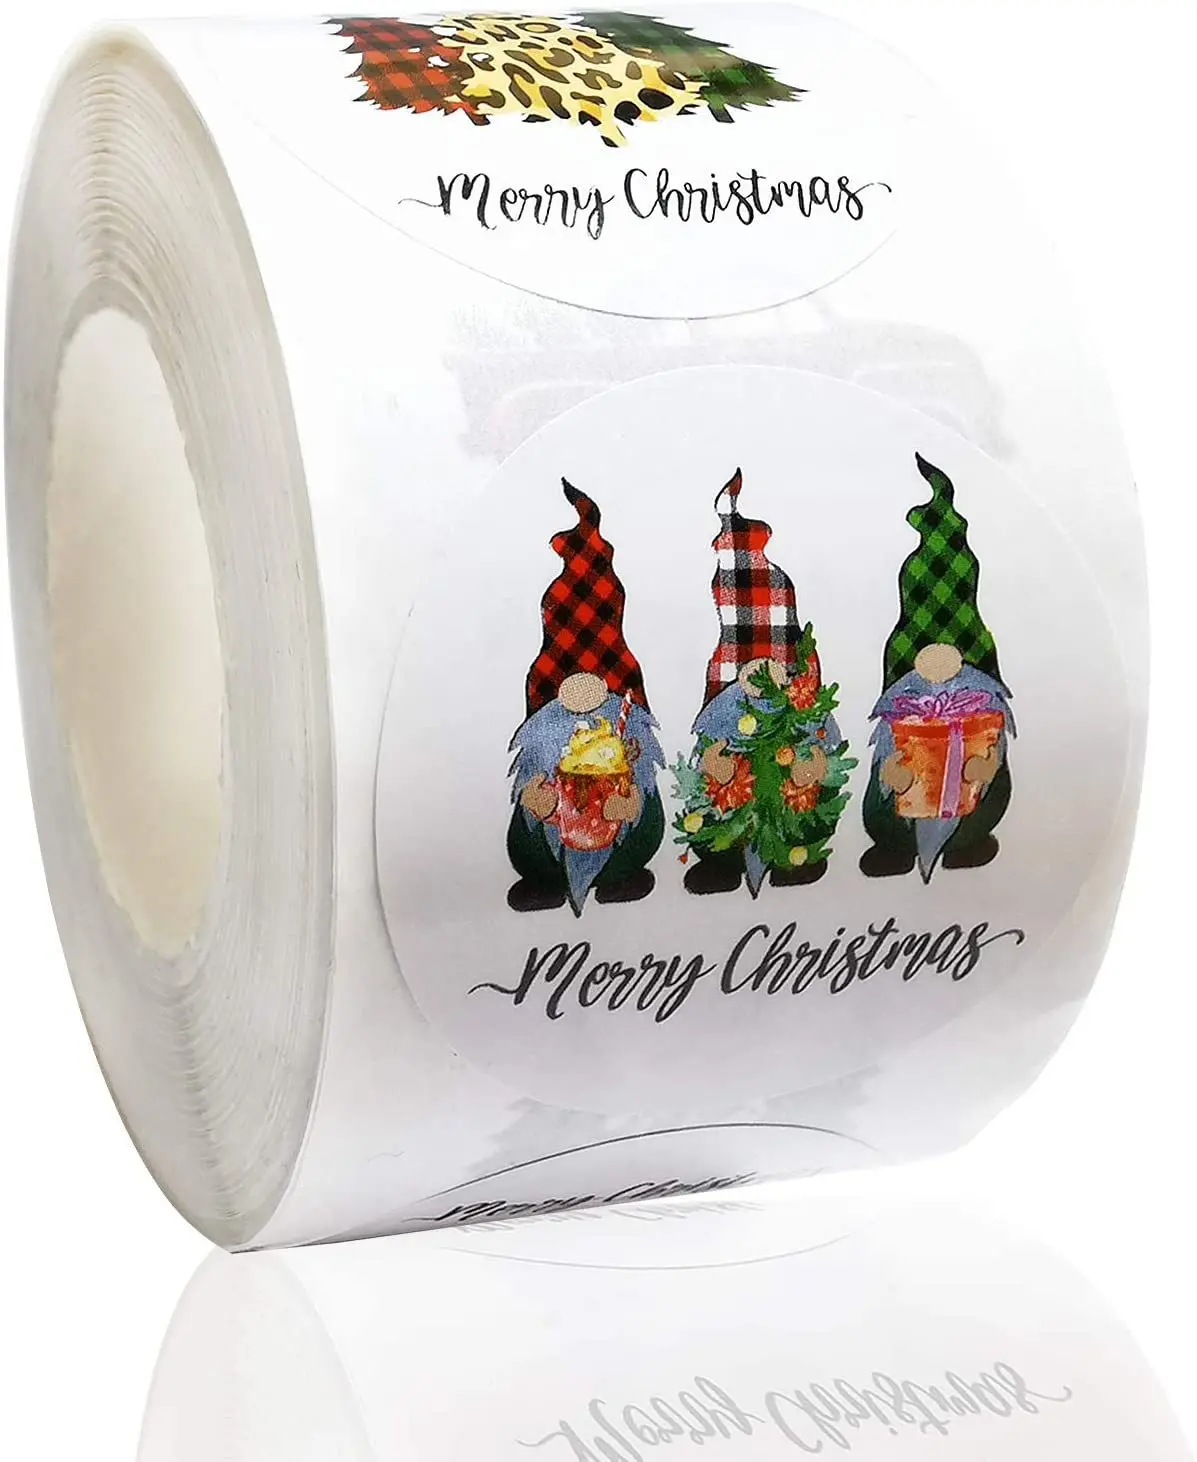 50-500Pcs Christmas Tree Santa Claus Merry Christmas Stickers 2.5cm Thank You Stickers for Gift Sealing Holiday Candy Bag Decor